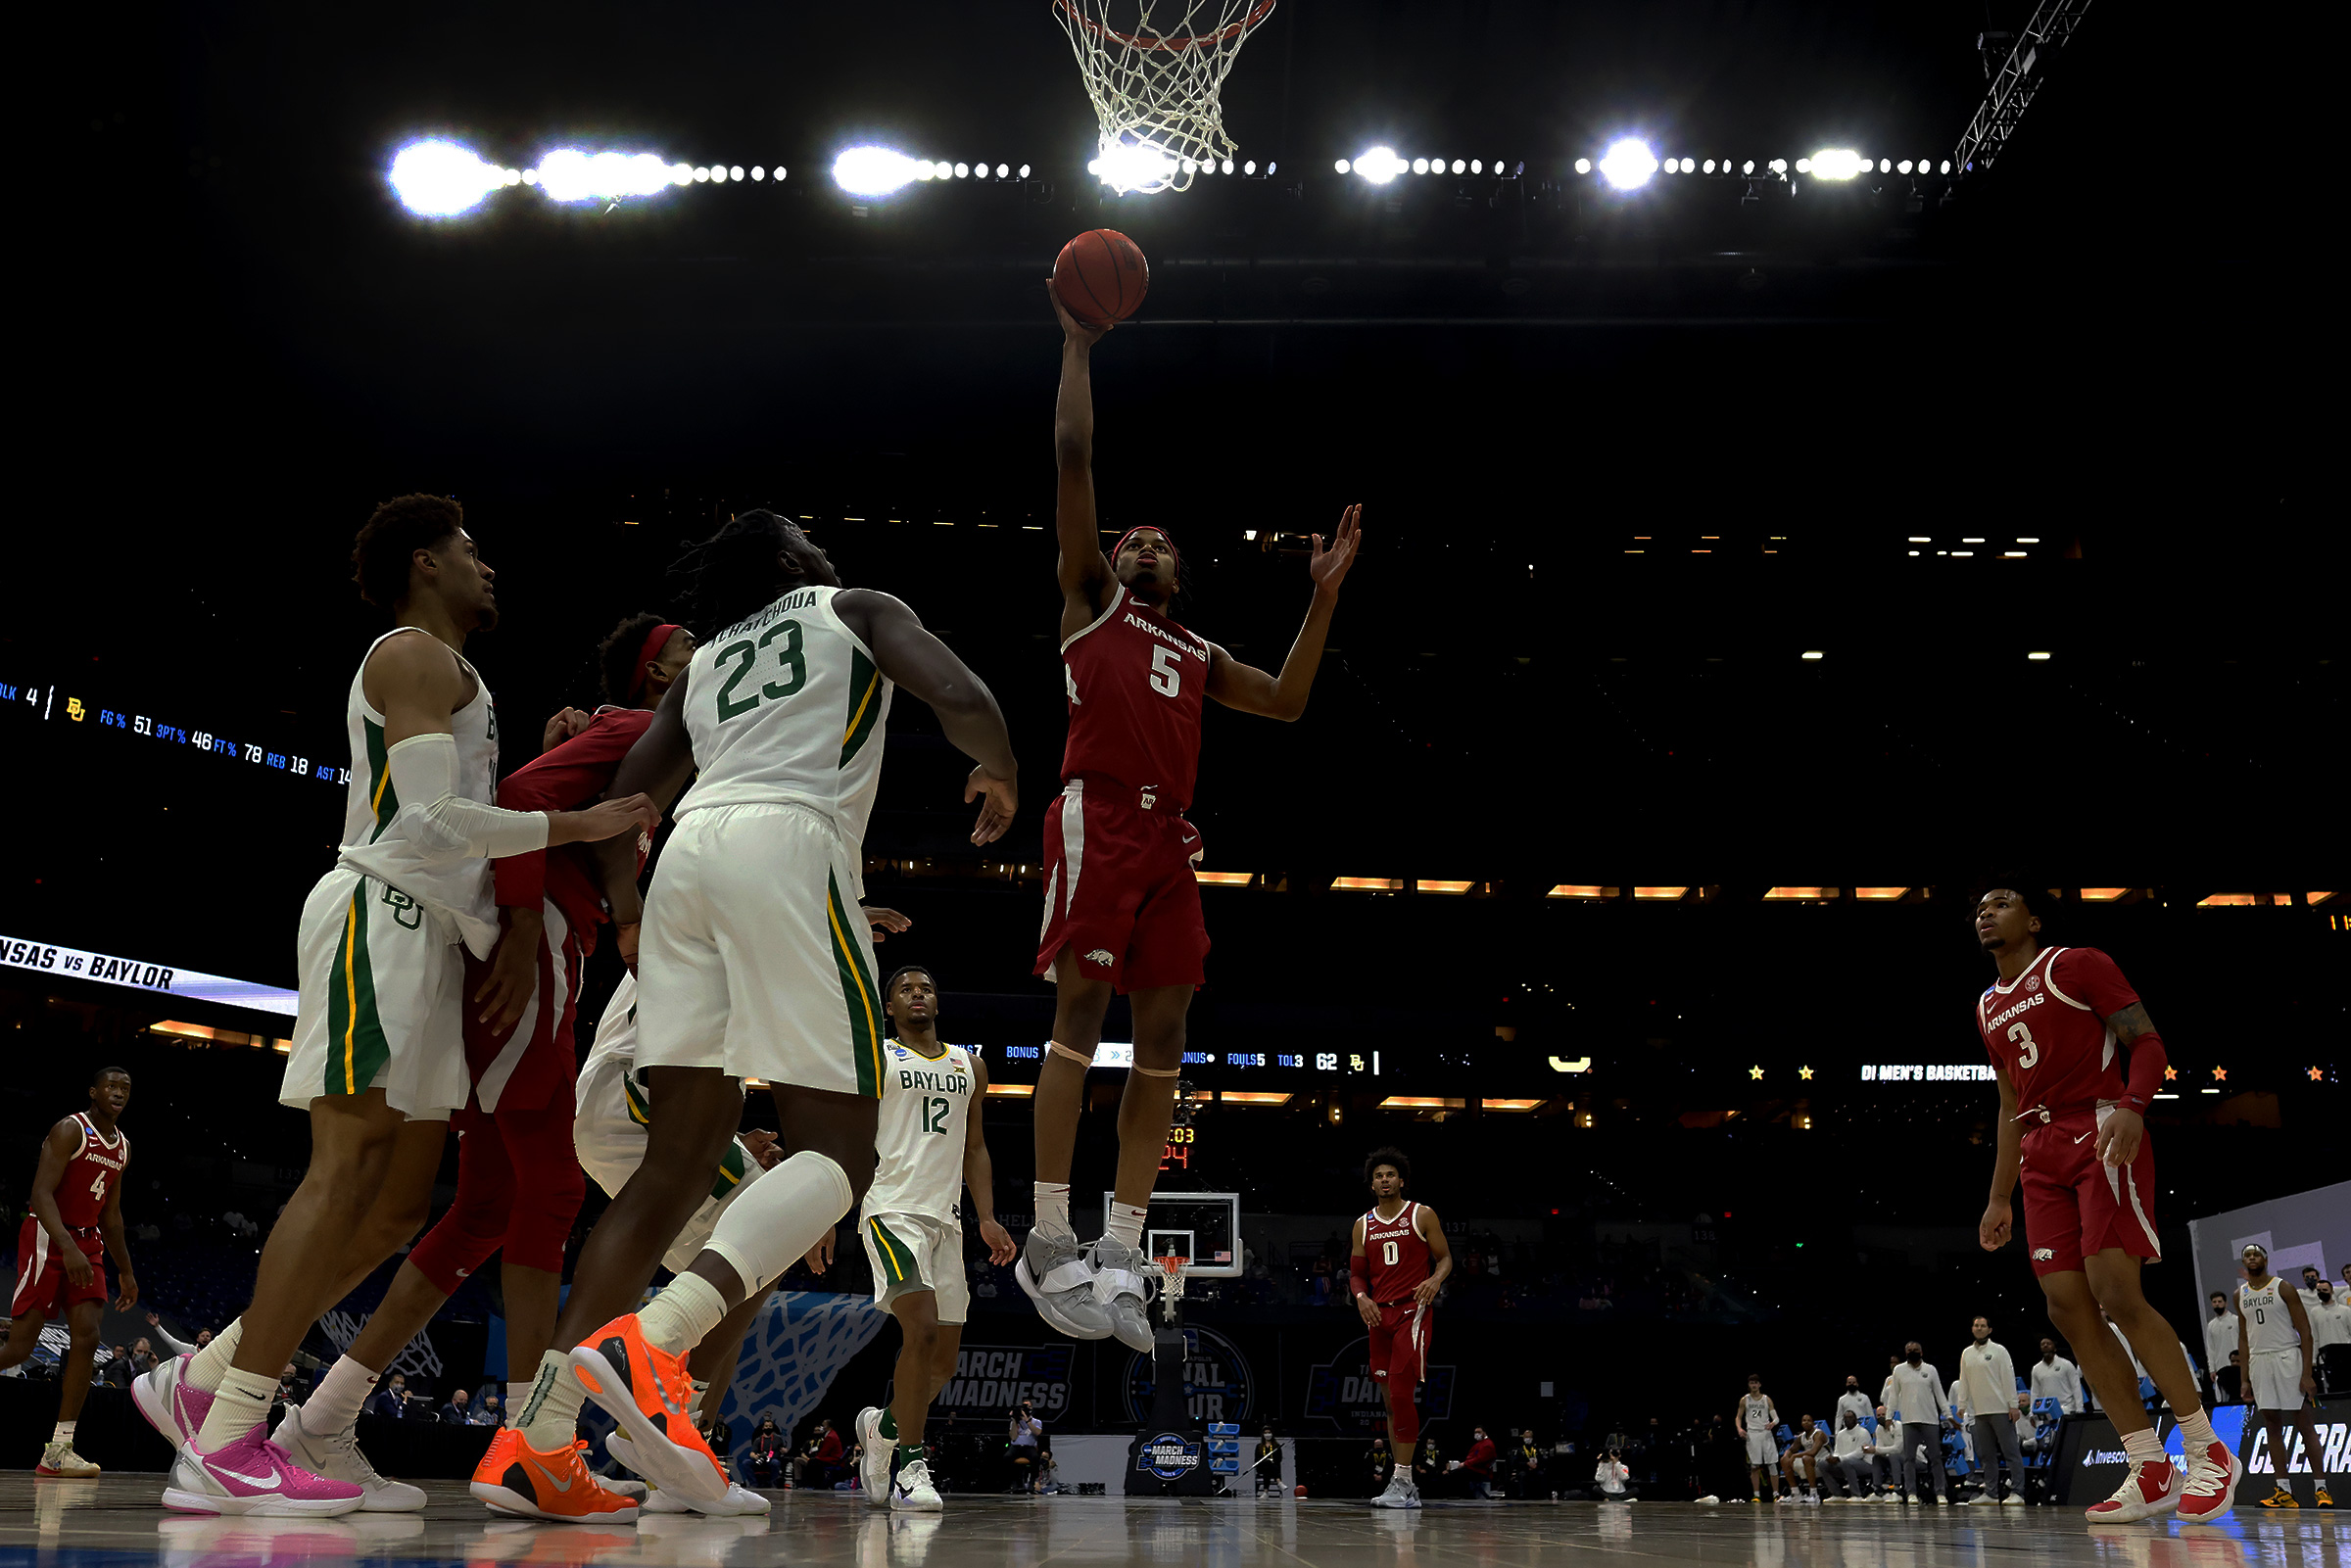 Moses Moody #5 of the Arkansas Razorbacks scores against the Baylor Bears in the Elite Eight round of the 2021 NCAA Division I Men's Basketball Tournament held at Lucas Oil Stadium on March 29, 2021 in Indianapolis, Indiana. (Jamie Schwaberow—NCAA Photos/Getty Images)